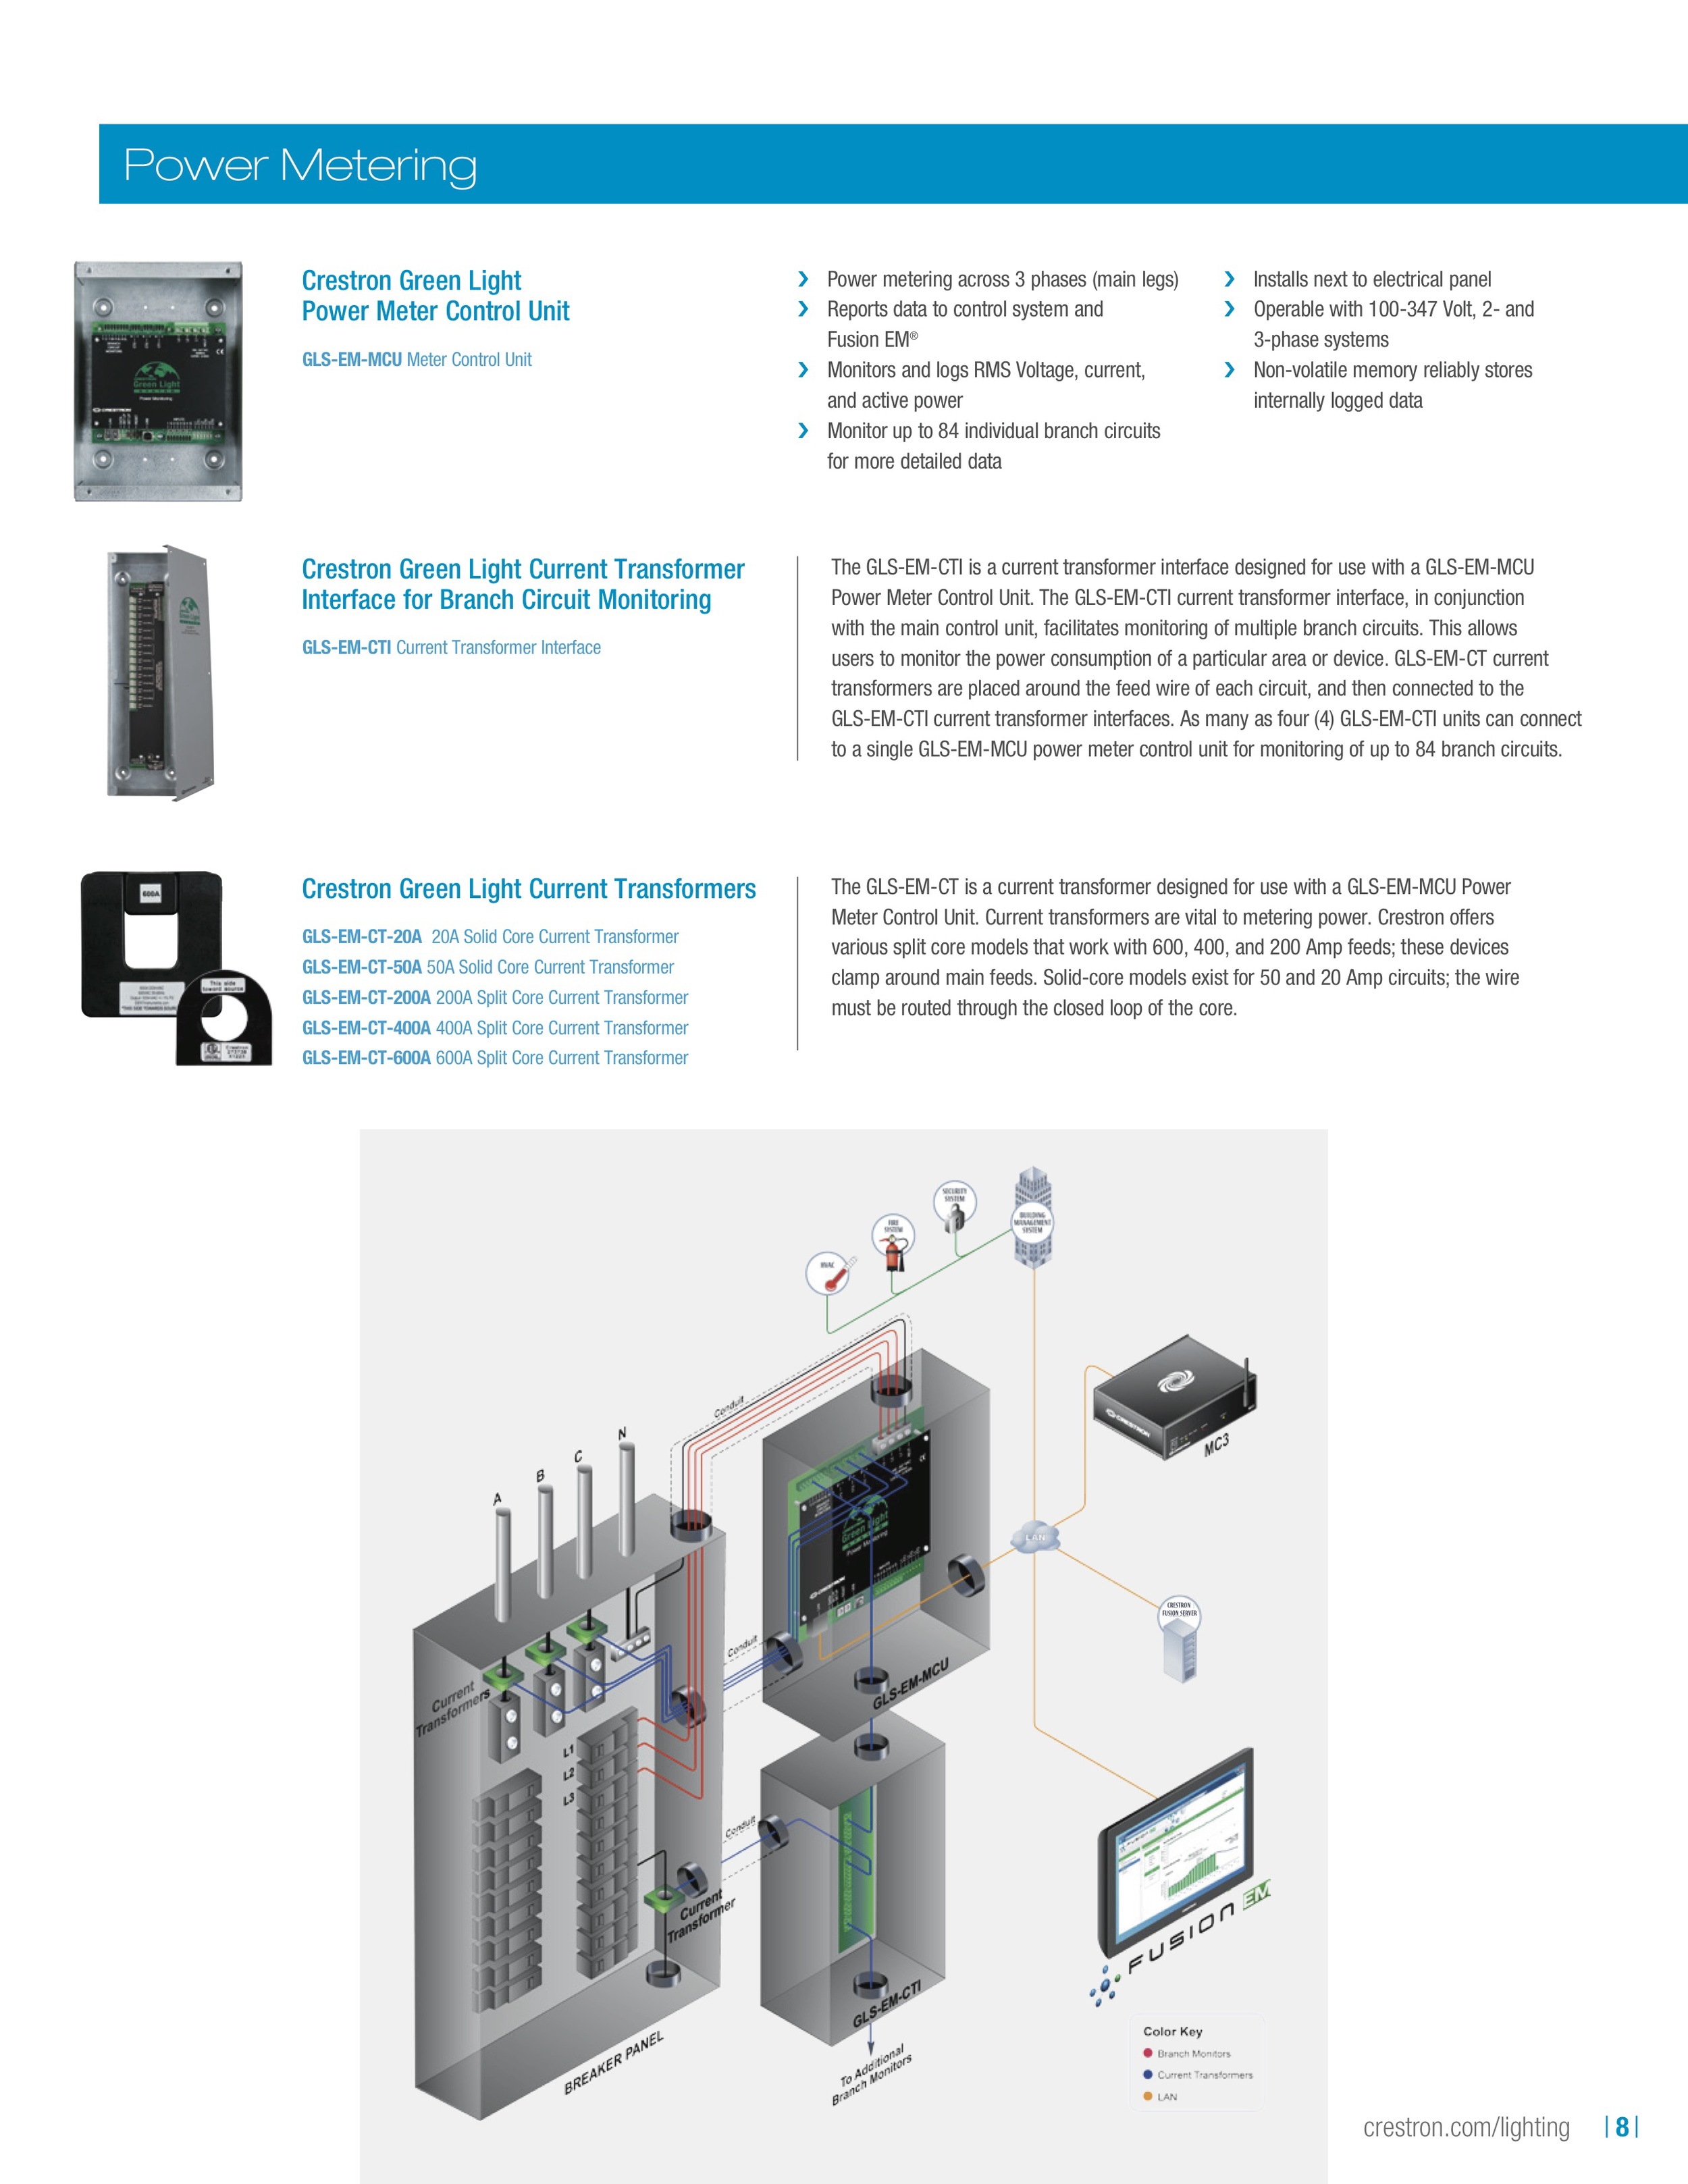 green_light_product_overview11.jpg